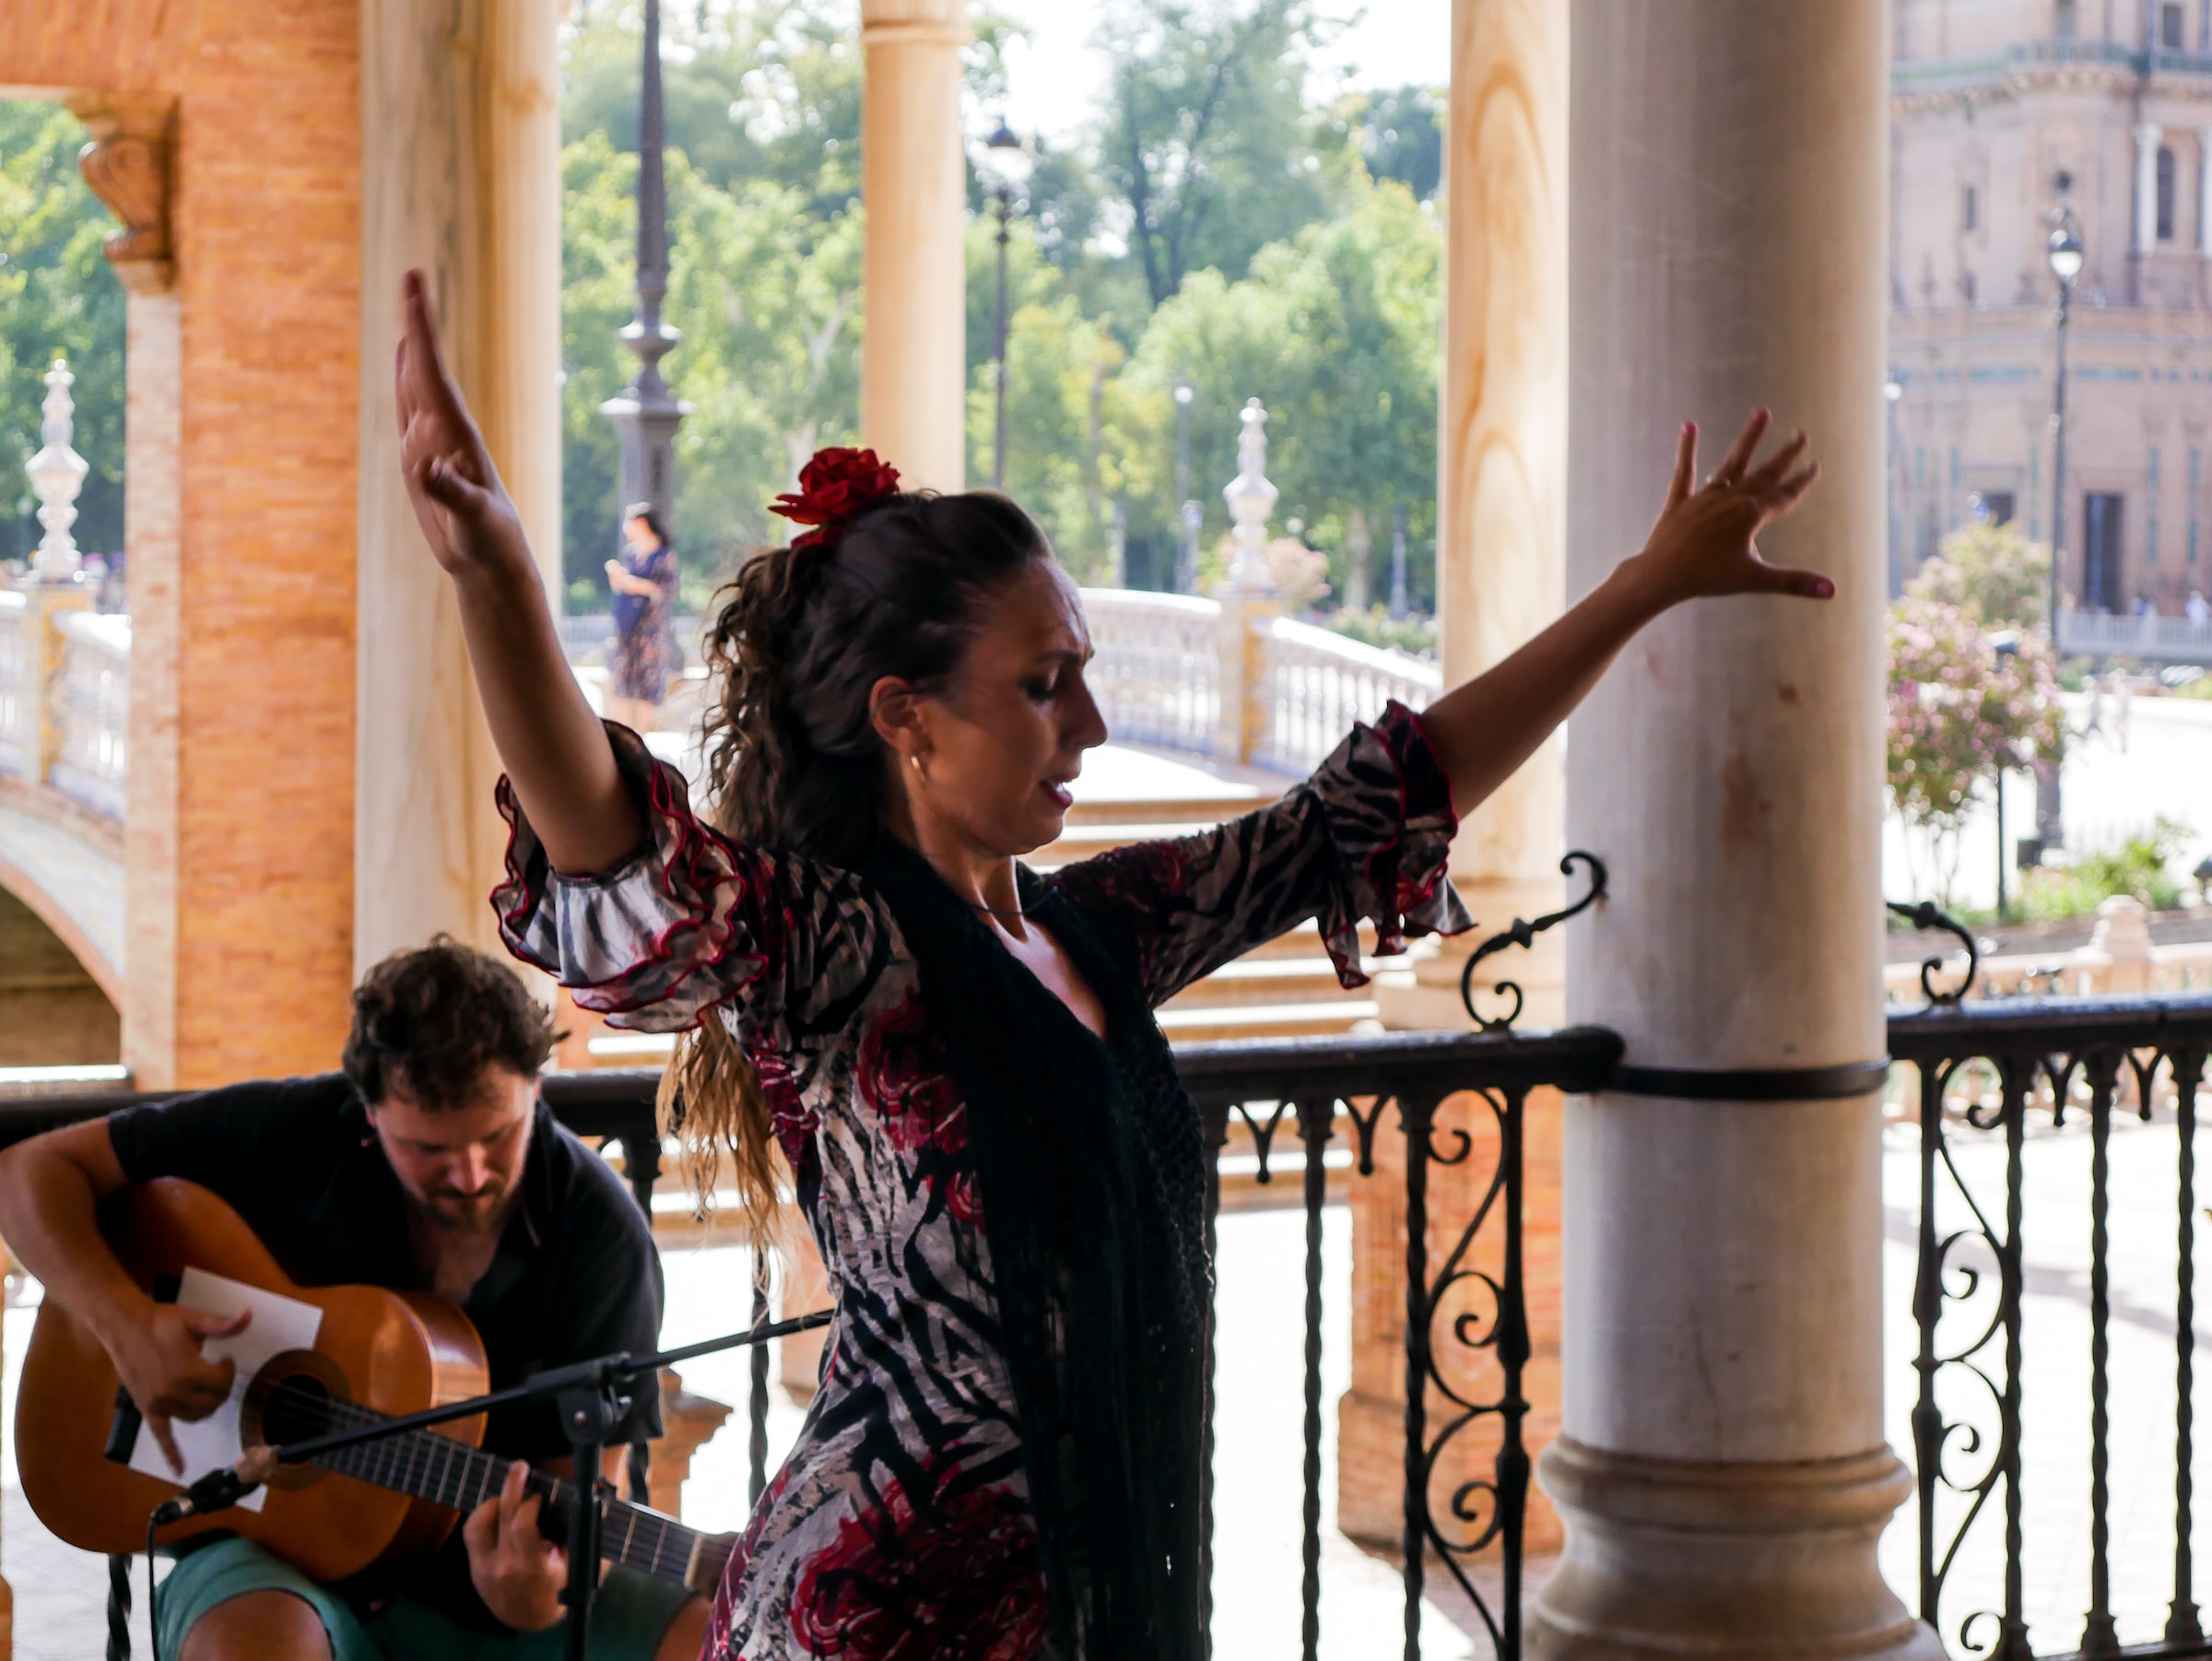 A flamenco dancing show in Seville